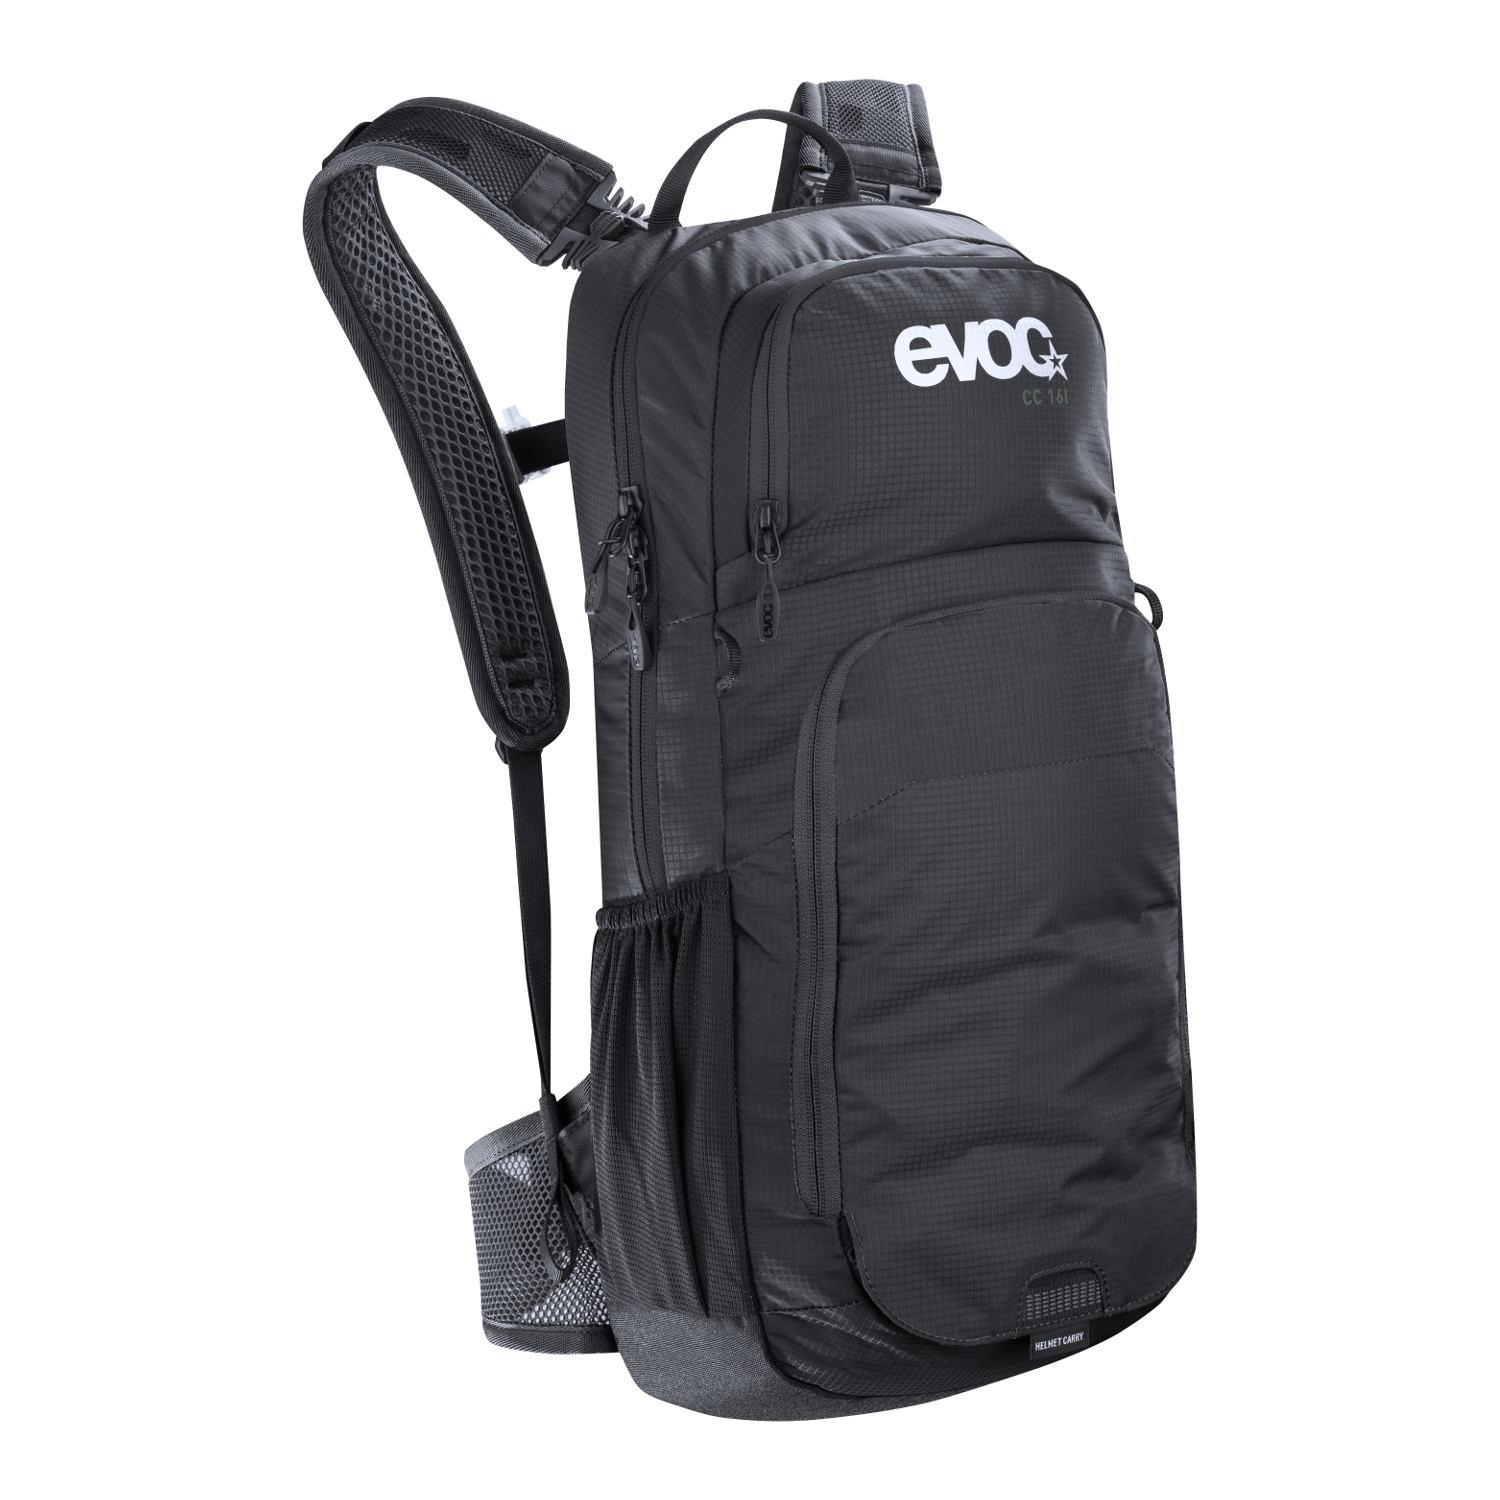 Evoc Backpack with Hydration System Cross Country Black, 16 Liter